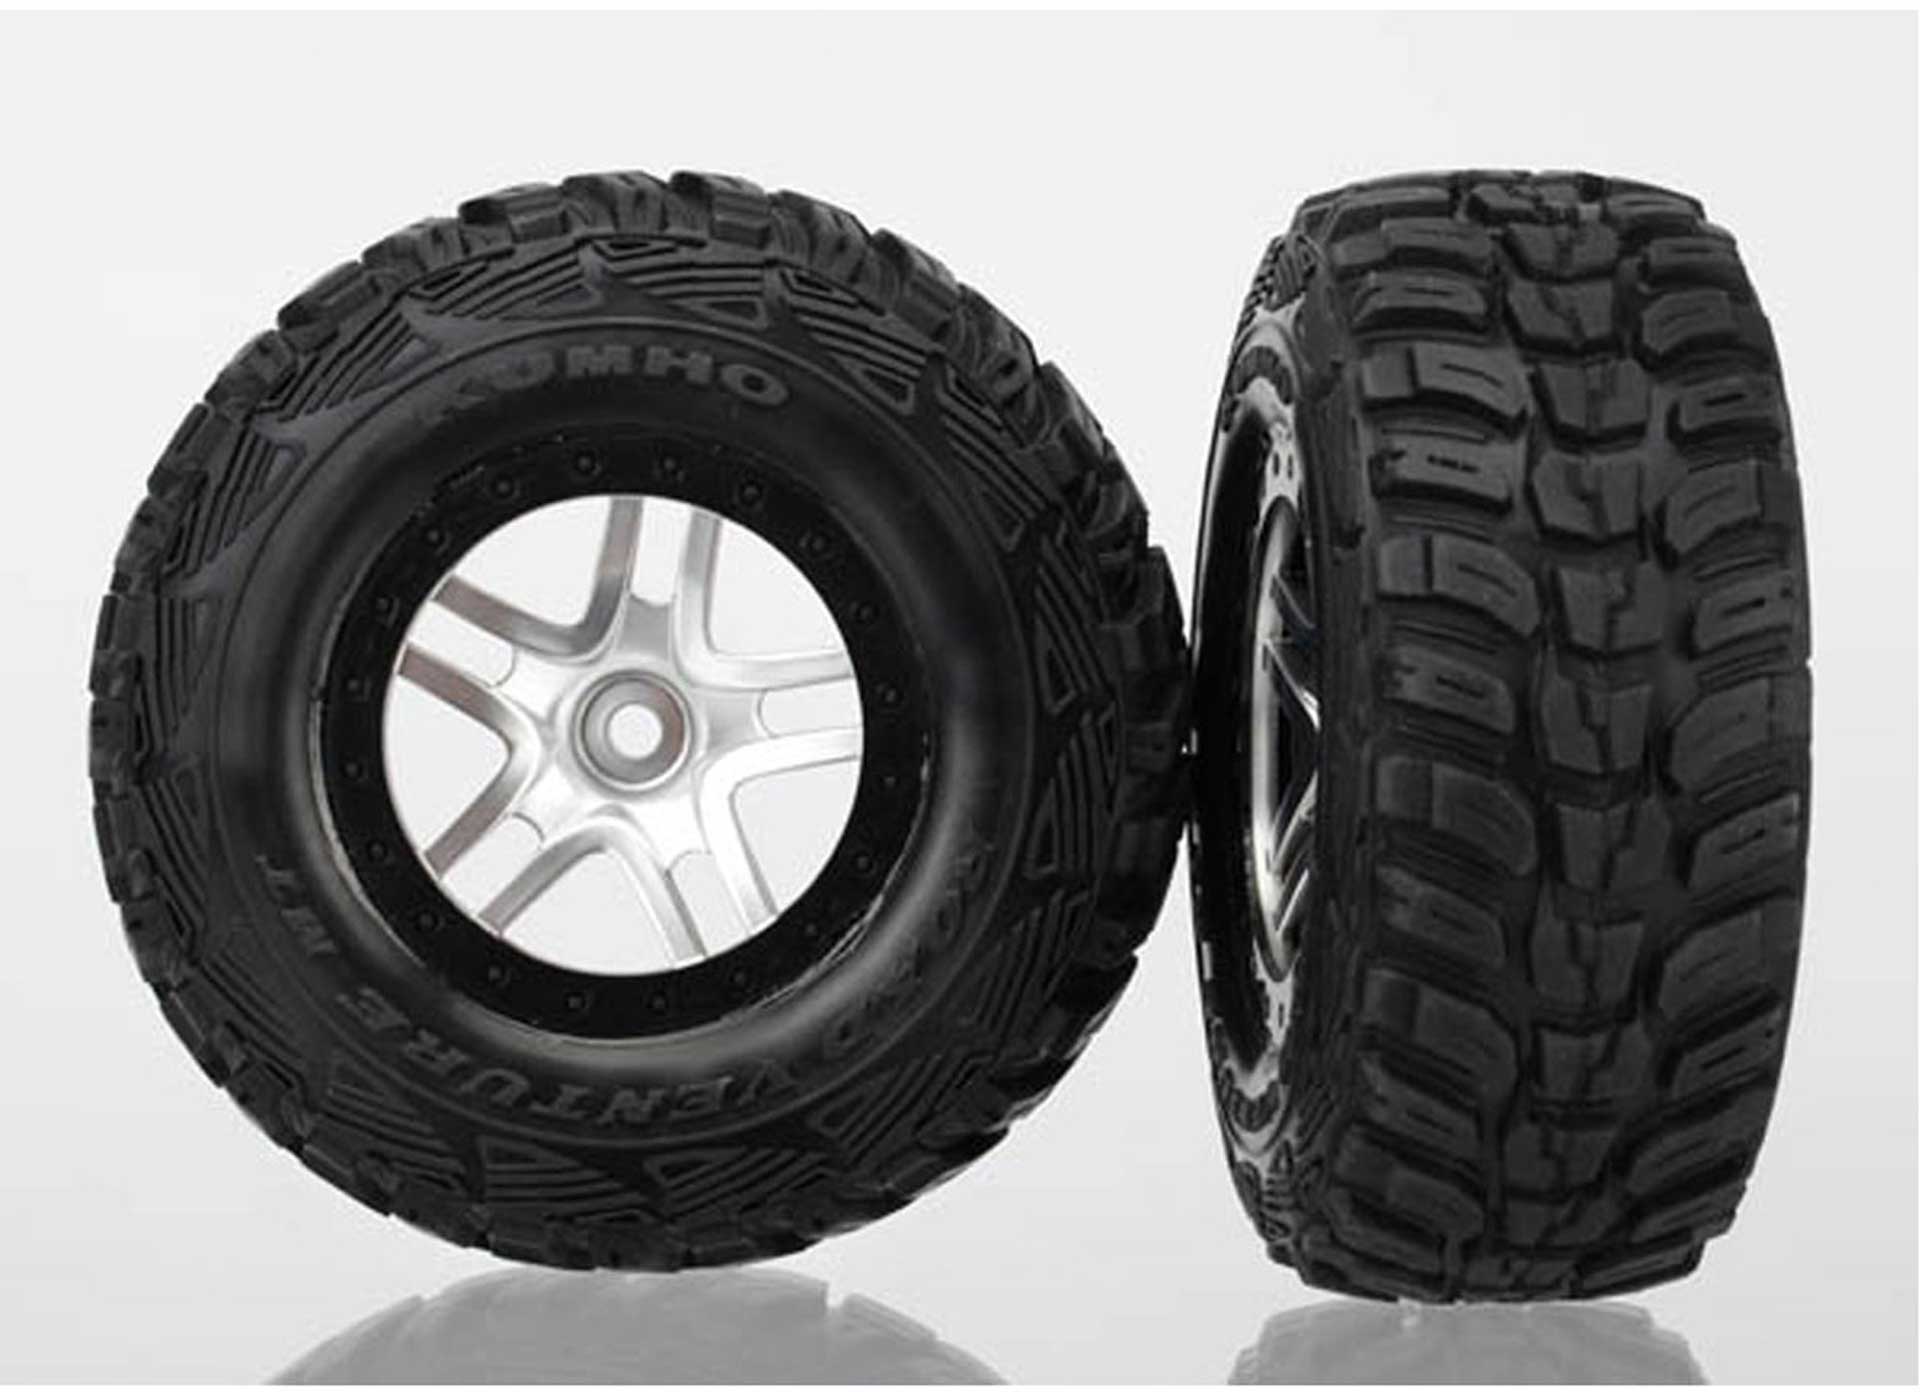 TRAXXAS ROUES MONTEES COLLEES KUMHO POUR 4X4 AVANT/ARRIERE -4X2 ARRIERE